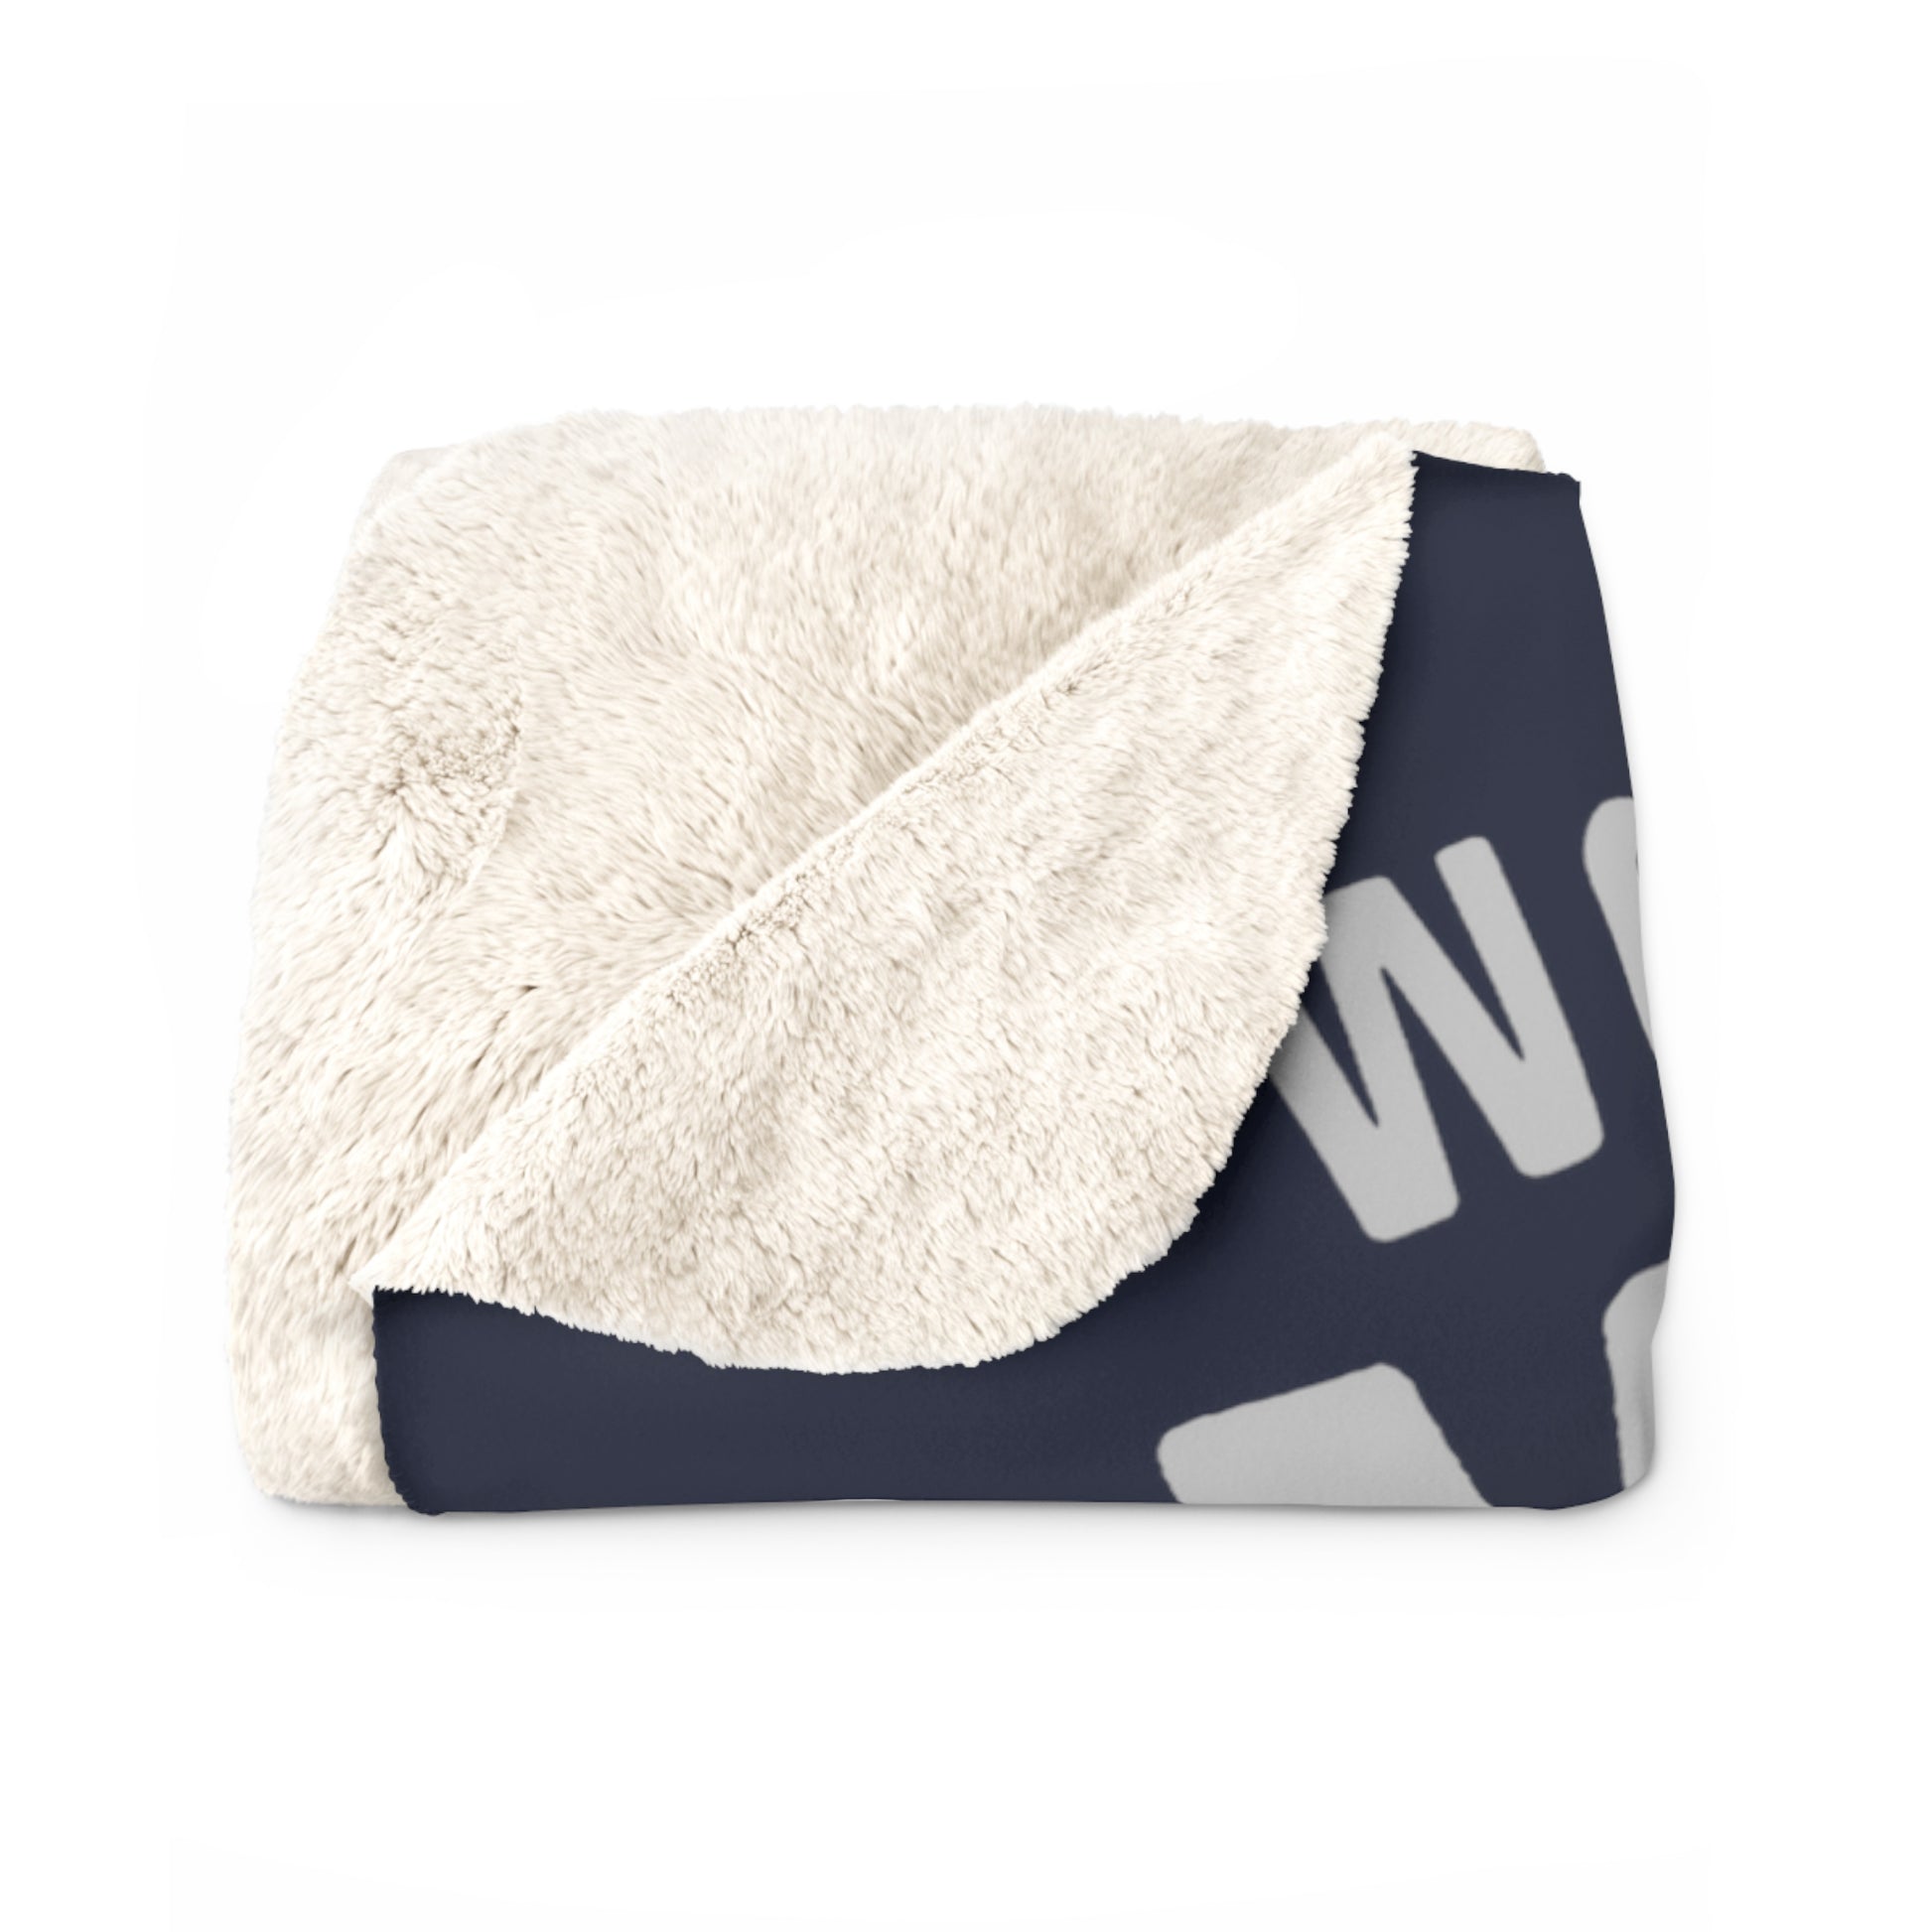 Work-From-Home Female Employee of the Month Sherpa Fleece Blanket - Chowdaheadz